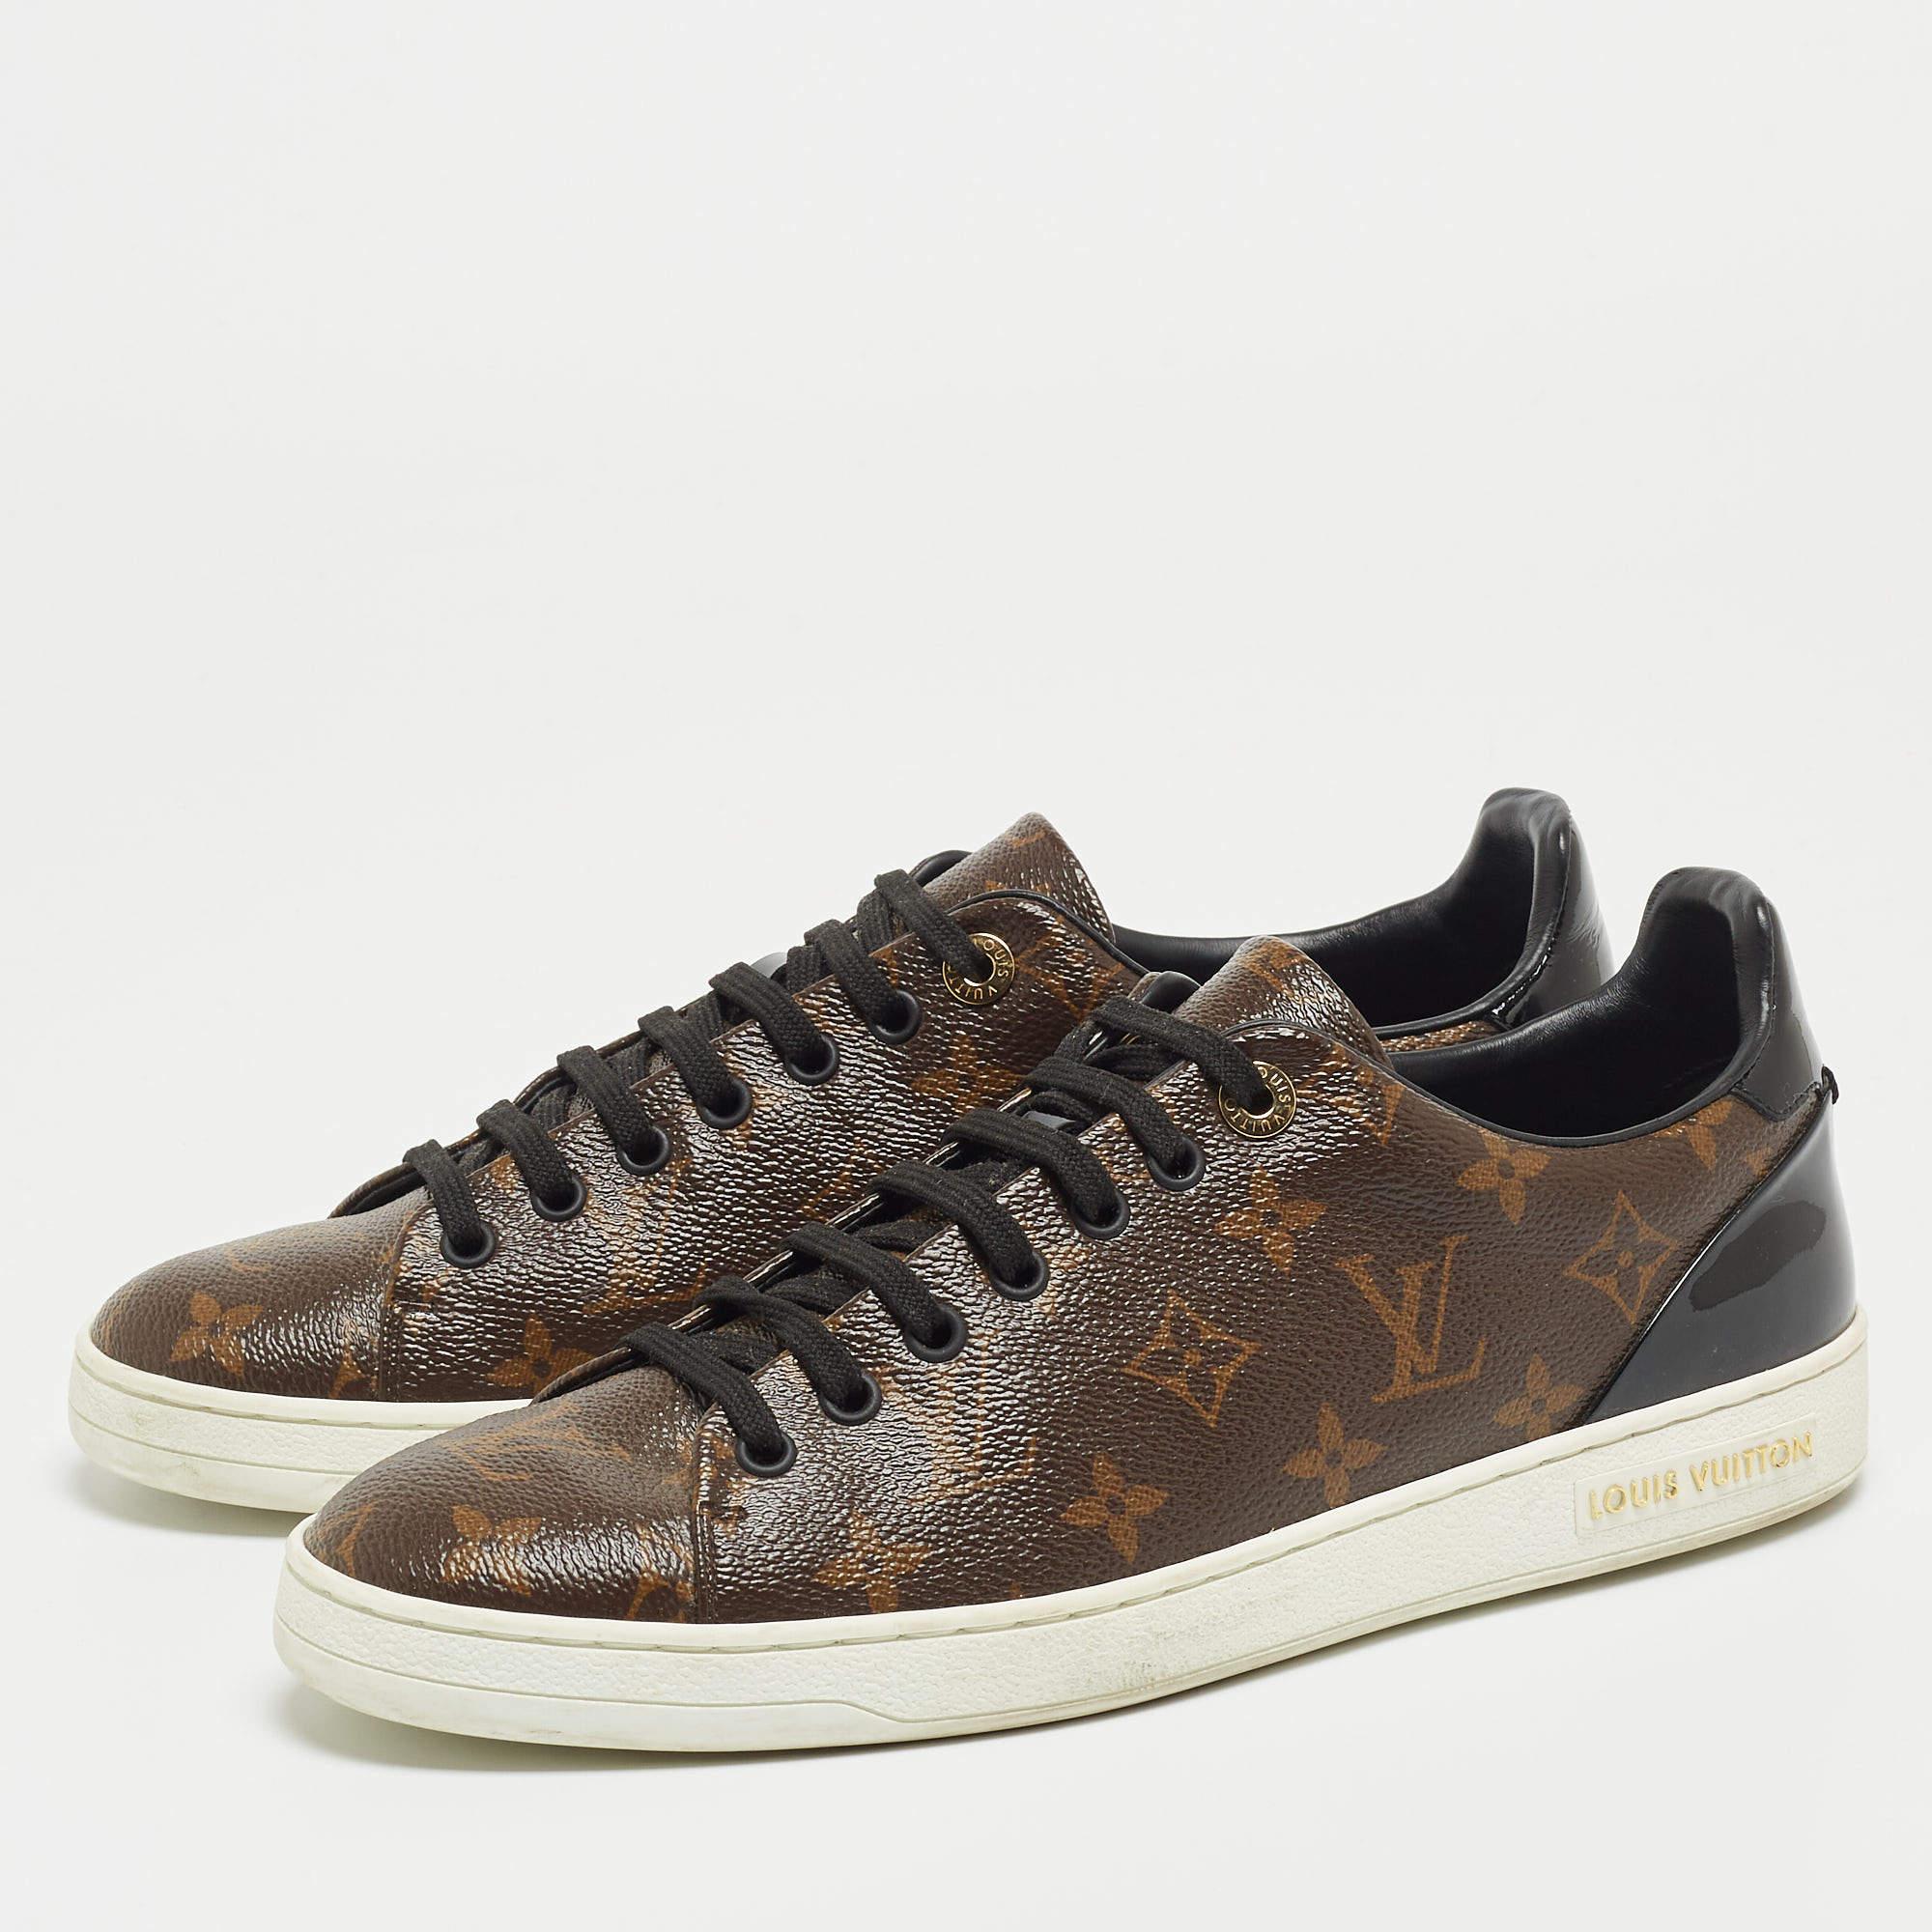 Louis Vuitton Brown Monogram Canvas and Patent Leather Frontrow Sneakers Size 41 2